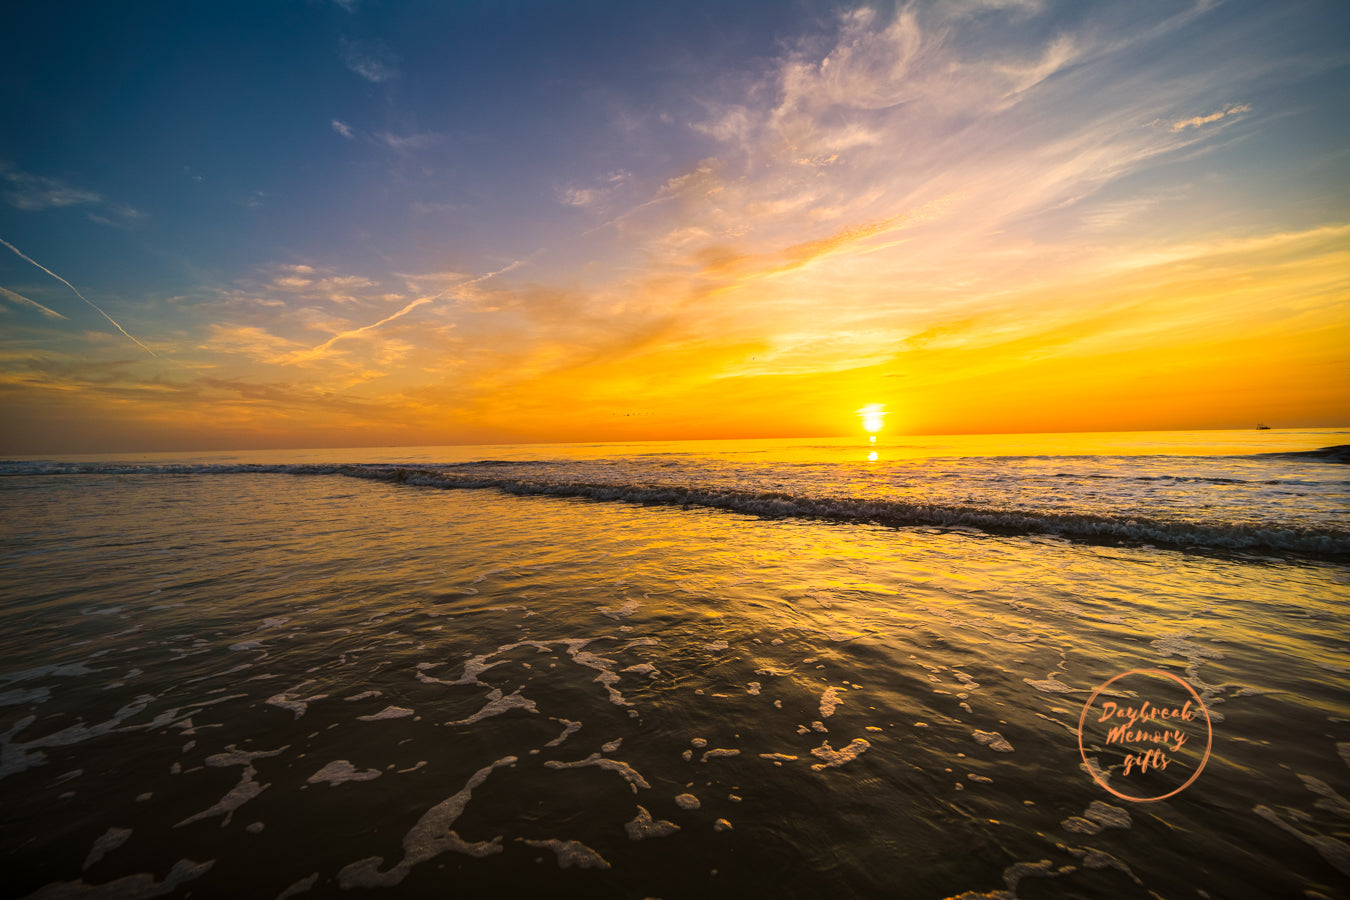 August 20, 2021 Sunrise over Jacksonville Beach. Wall art with a purpose. The perfect unique gift for special occasions like Newborn Baby gift, Wedding gift, Baptism gift or Client Gifts for their special occasions. Give them the Sunrise that corresponds to their special day. These high quality prints also make for stunning wall art that add a WOW Factor to room décor or office décor.